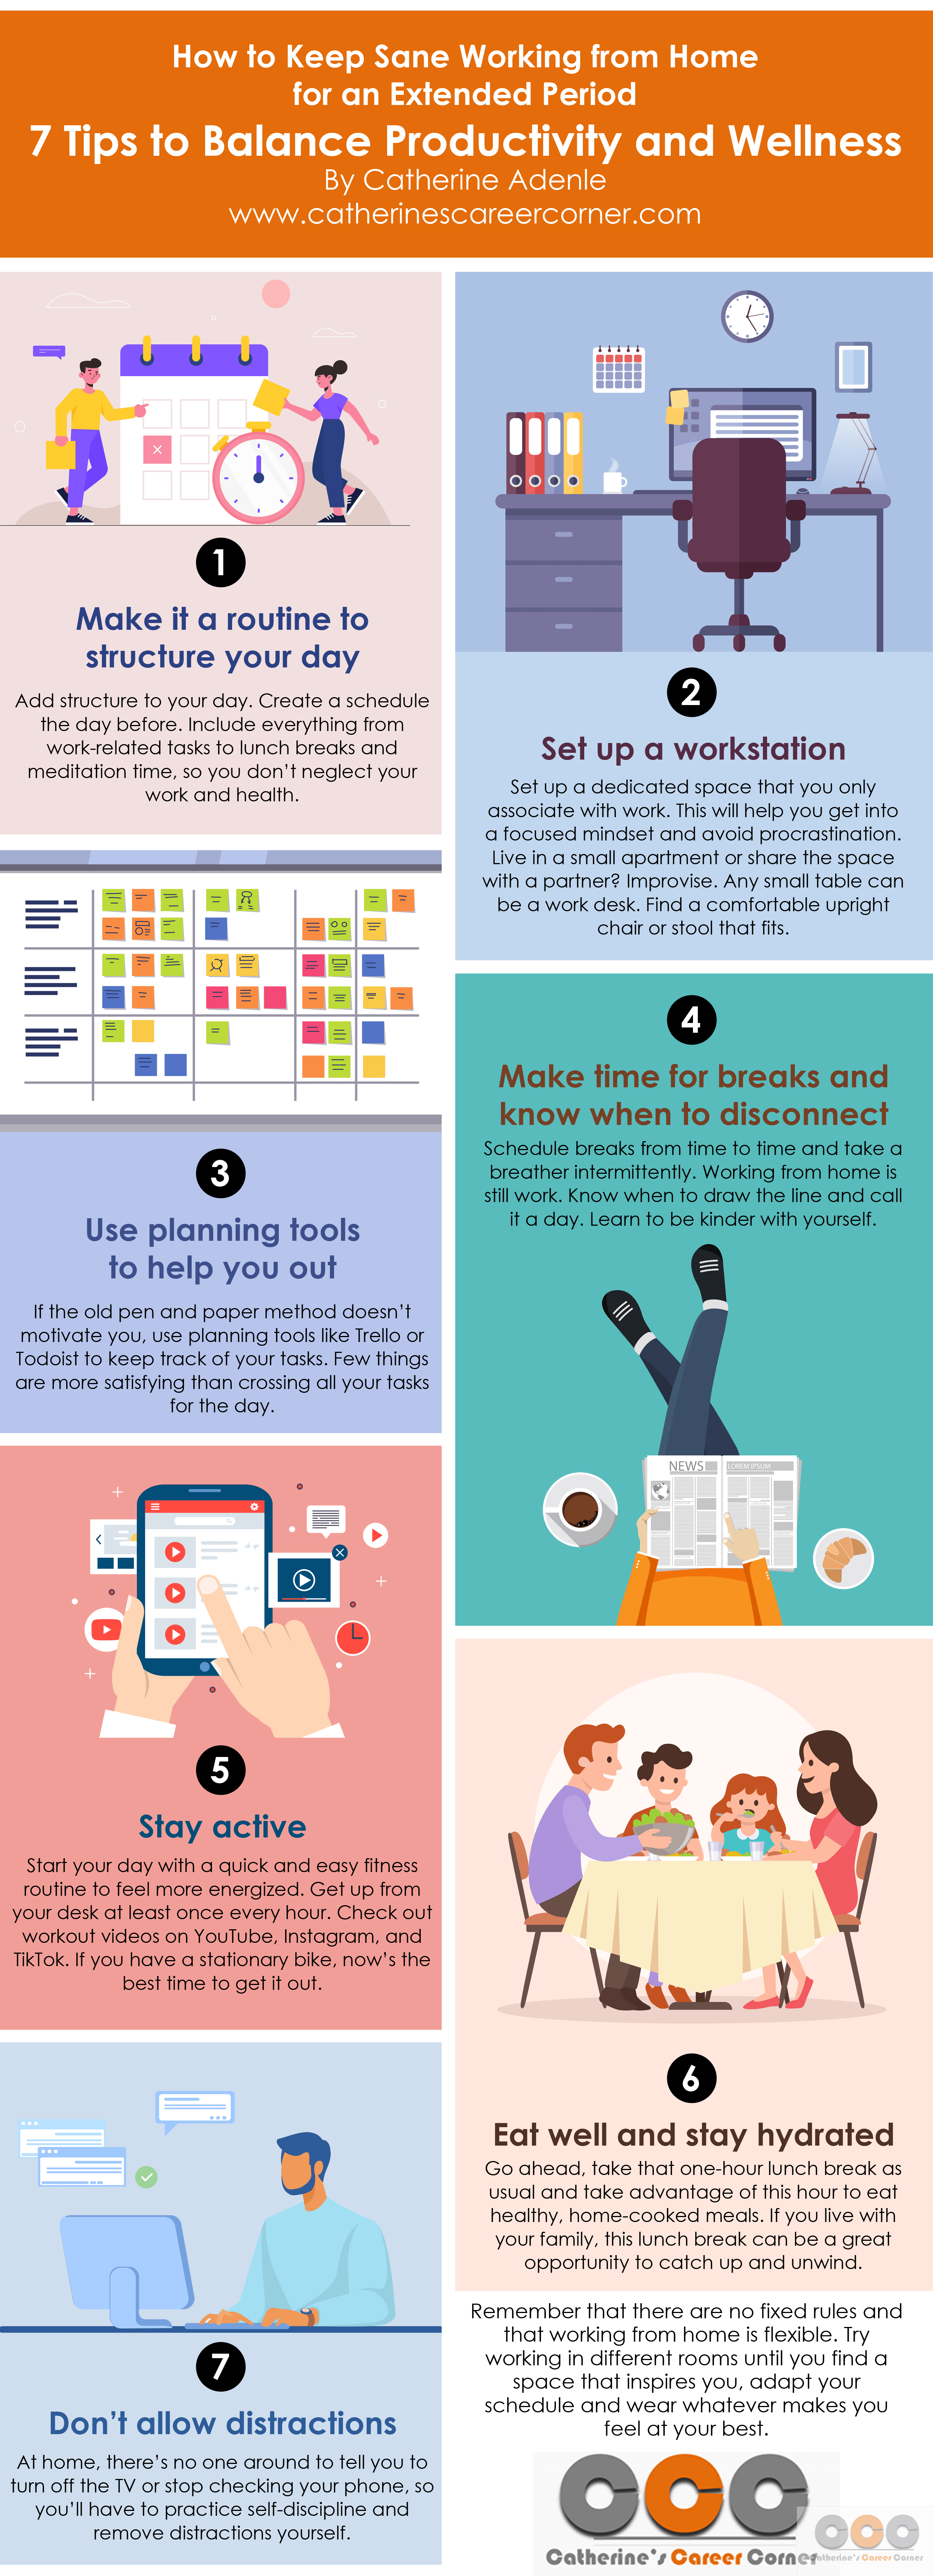 How to keep sane working from home for an extended period_Infographic